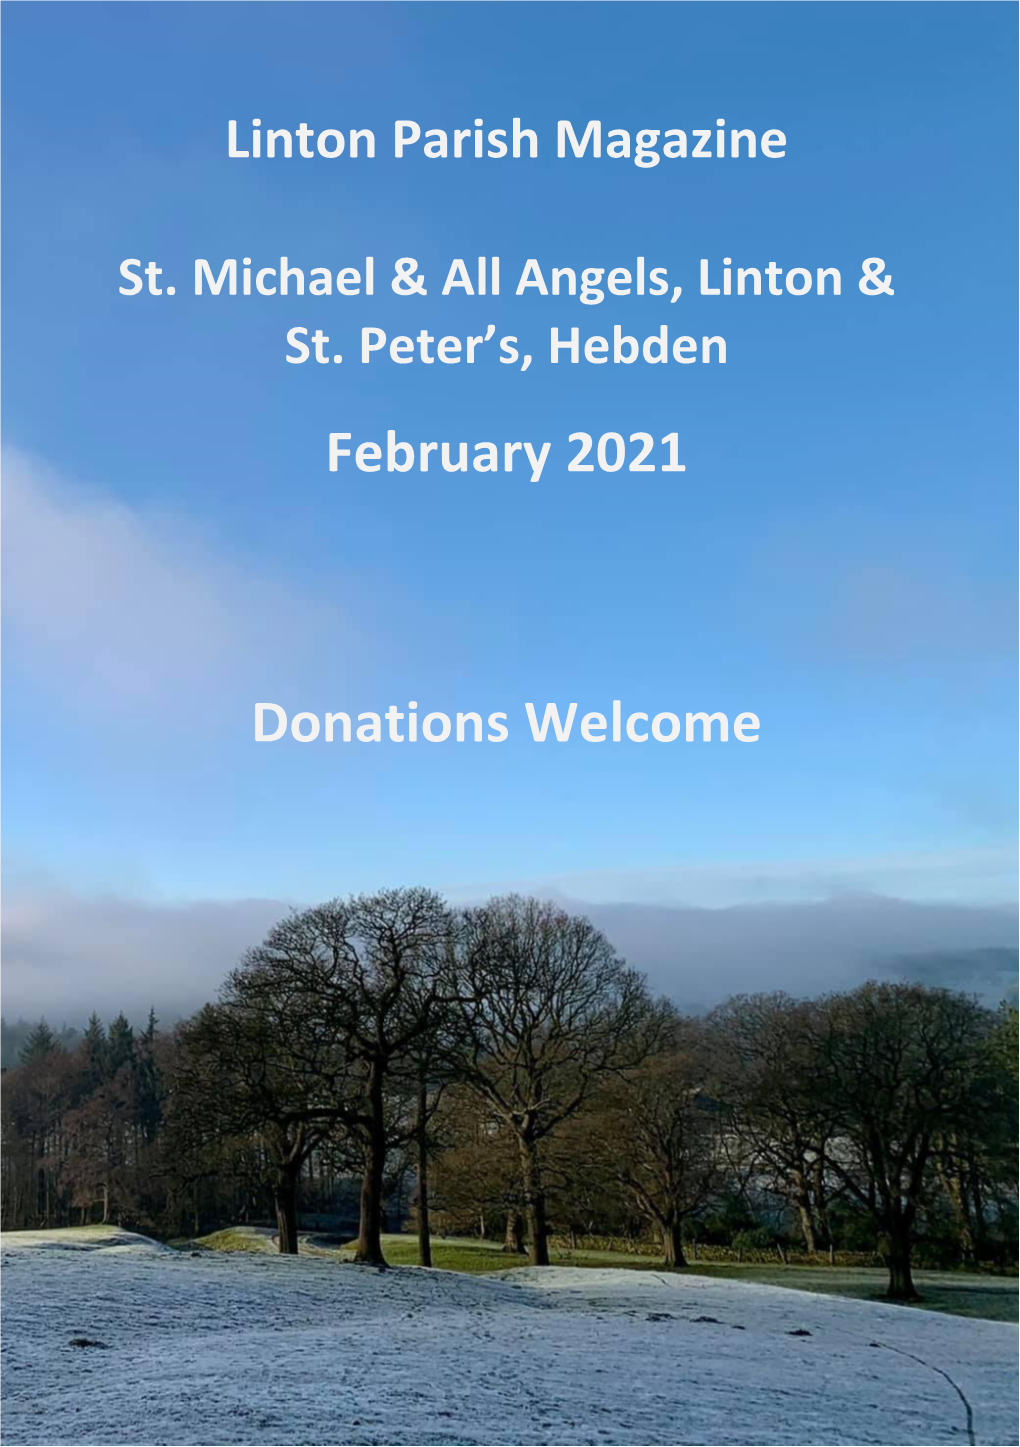 February 2021 Donations Welcome